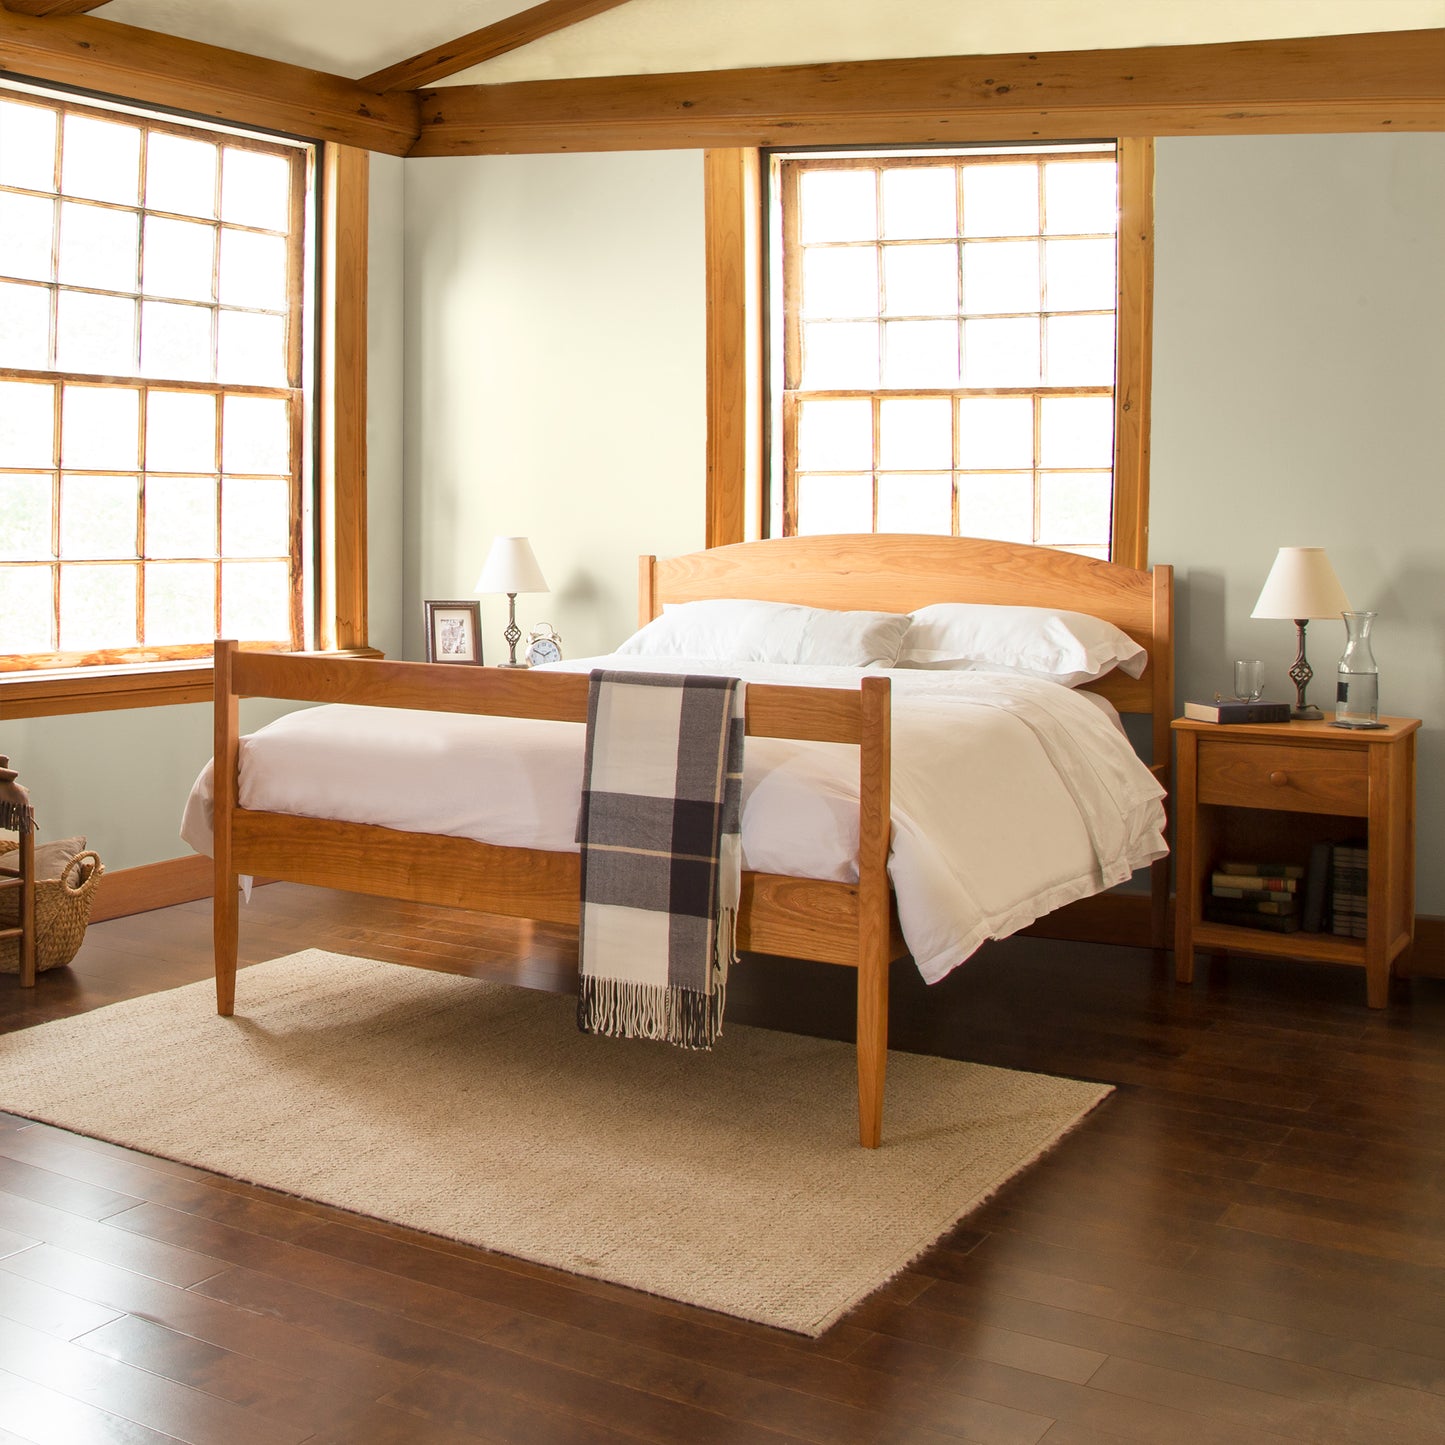 A neatly made Maple Corner Woodworks Vermont Shaker Platform Bed with white bedding and a plaid throw blanket in a room with wooden floors, rustic framed windows, and matching wooden nightstands with lamps.